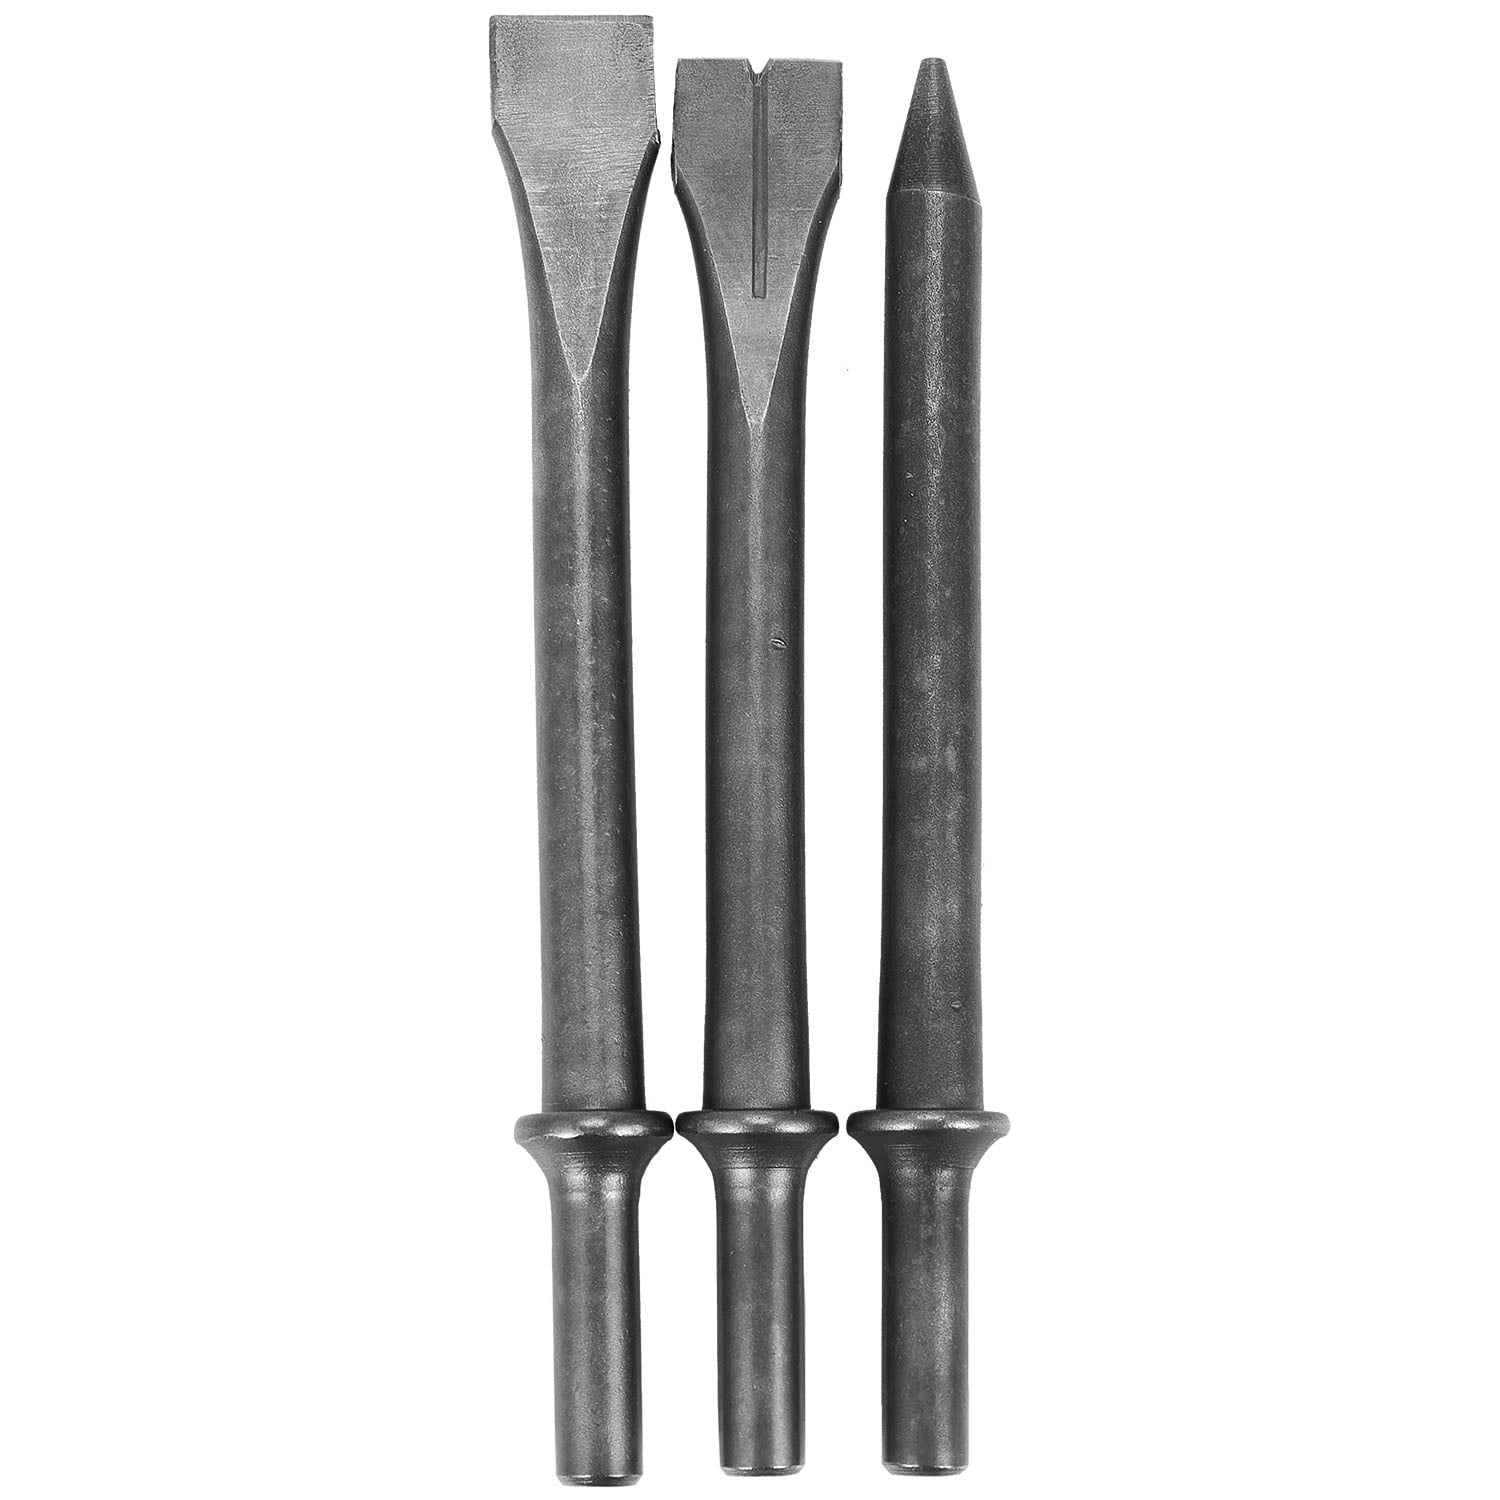 Air Hammer Chisel/ Punch/ Cutter Bit Set Repair Tools Chipping For Masonry Tool 